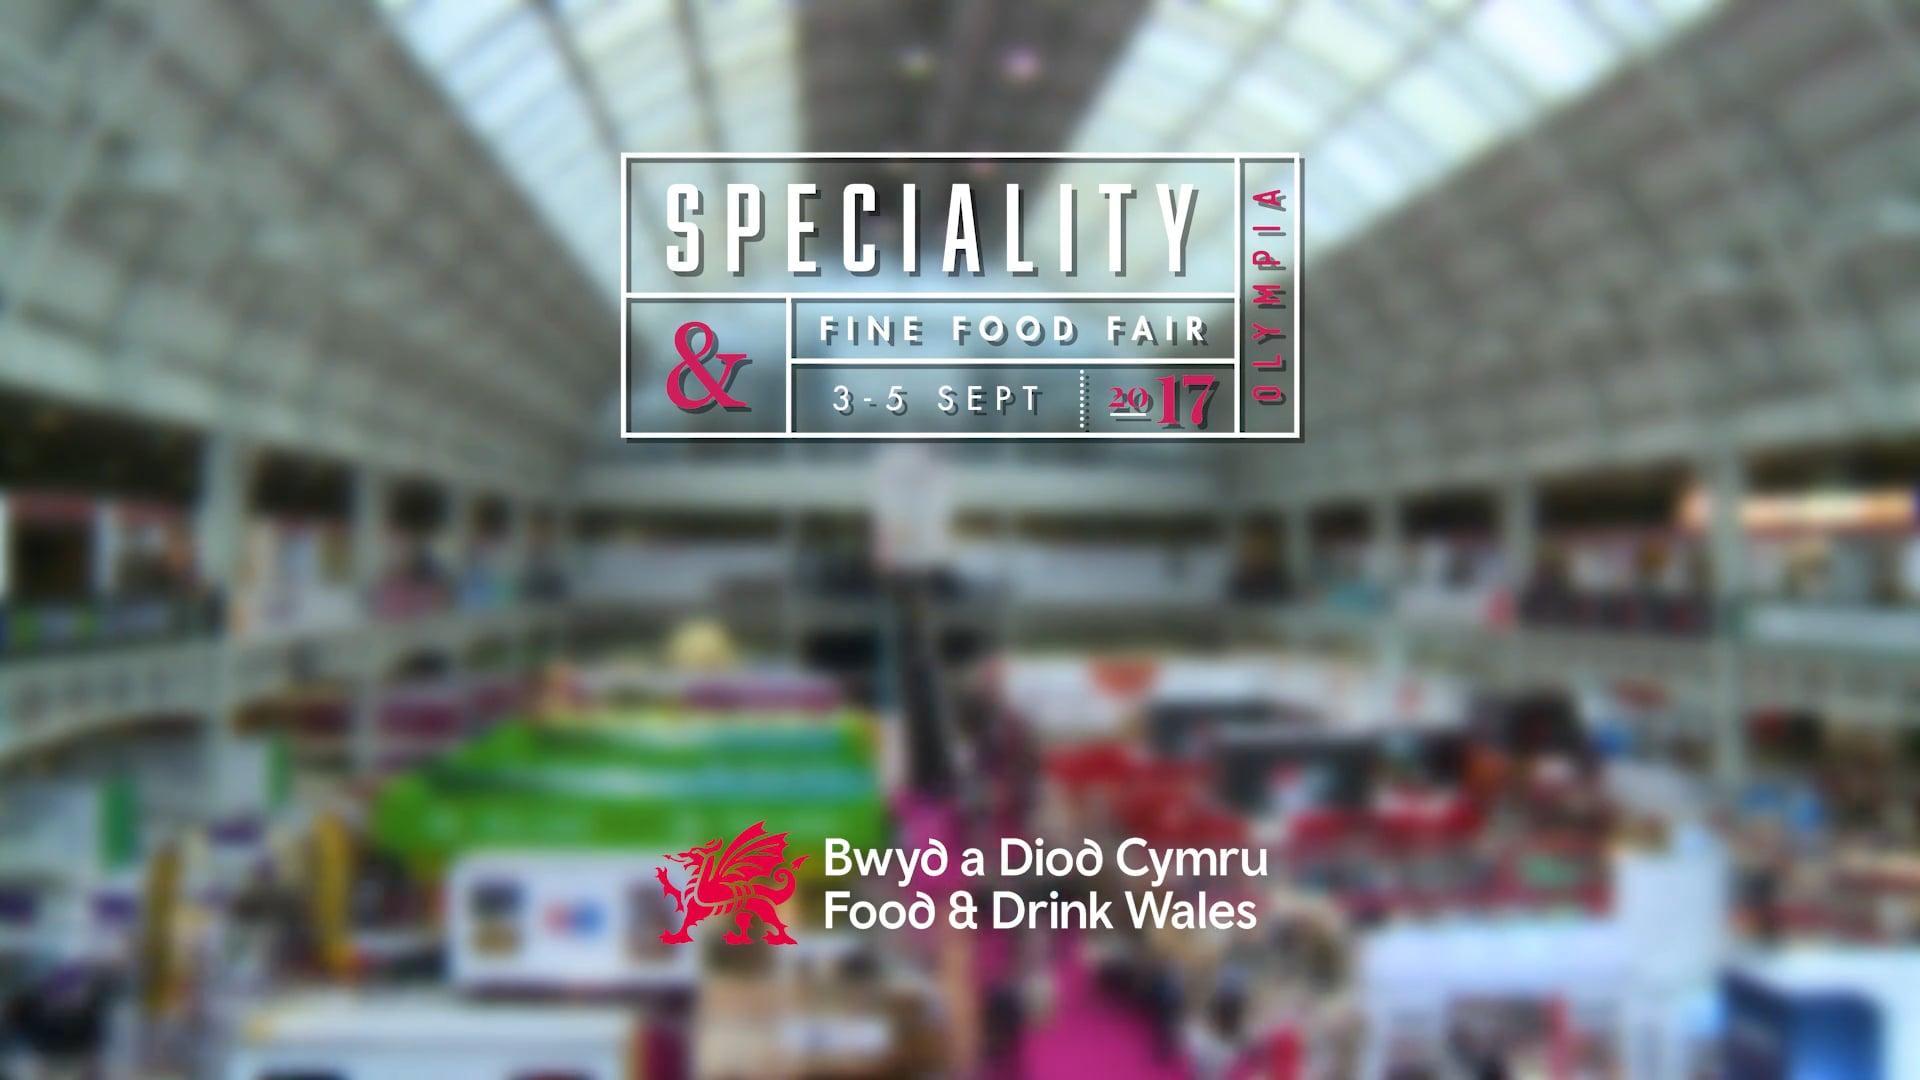 Speciality (Edit 1)